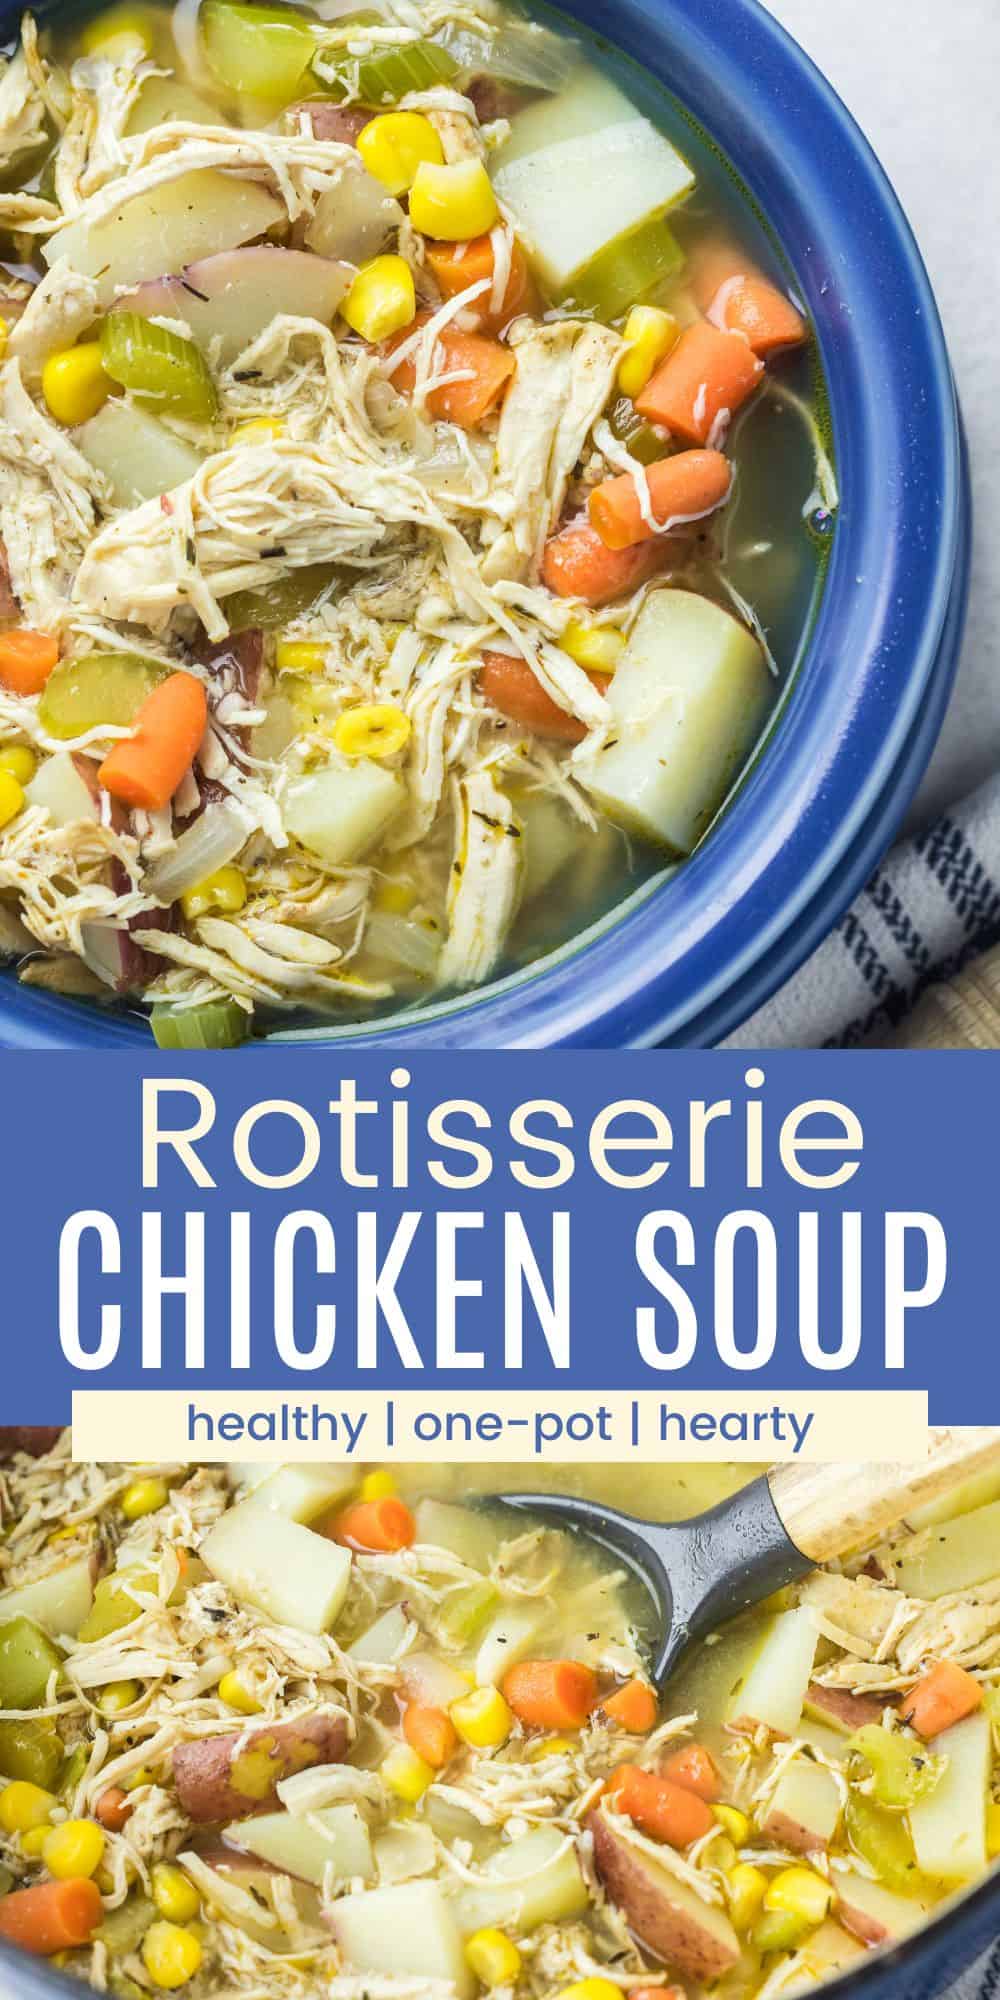 Hearty Rotisserie Chicken Soup | Cupcakes & Kale Chips